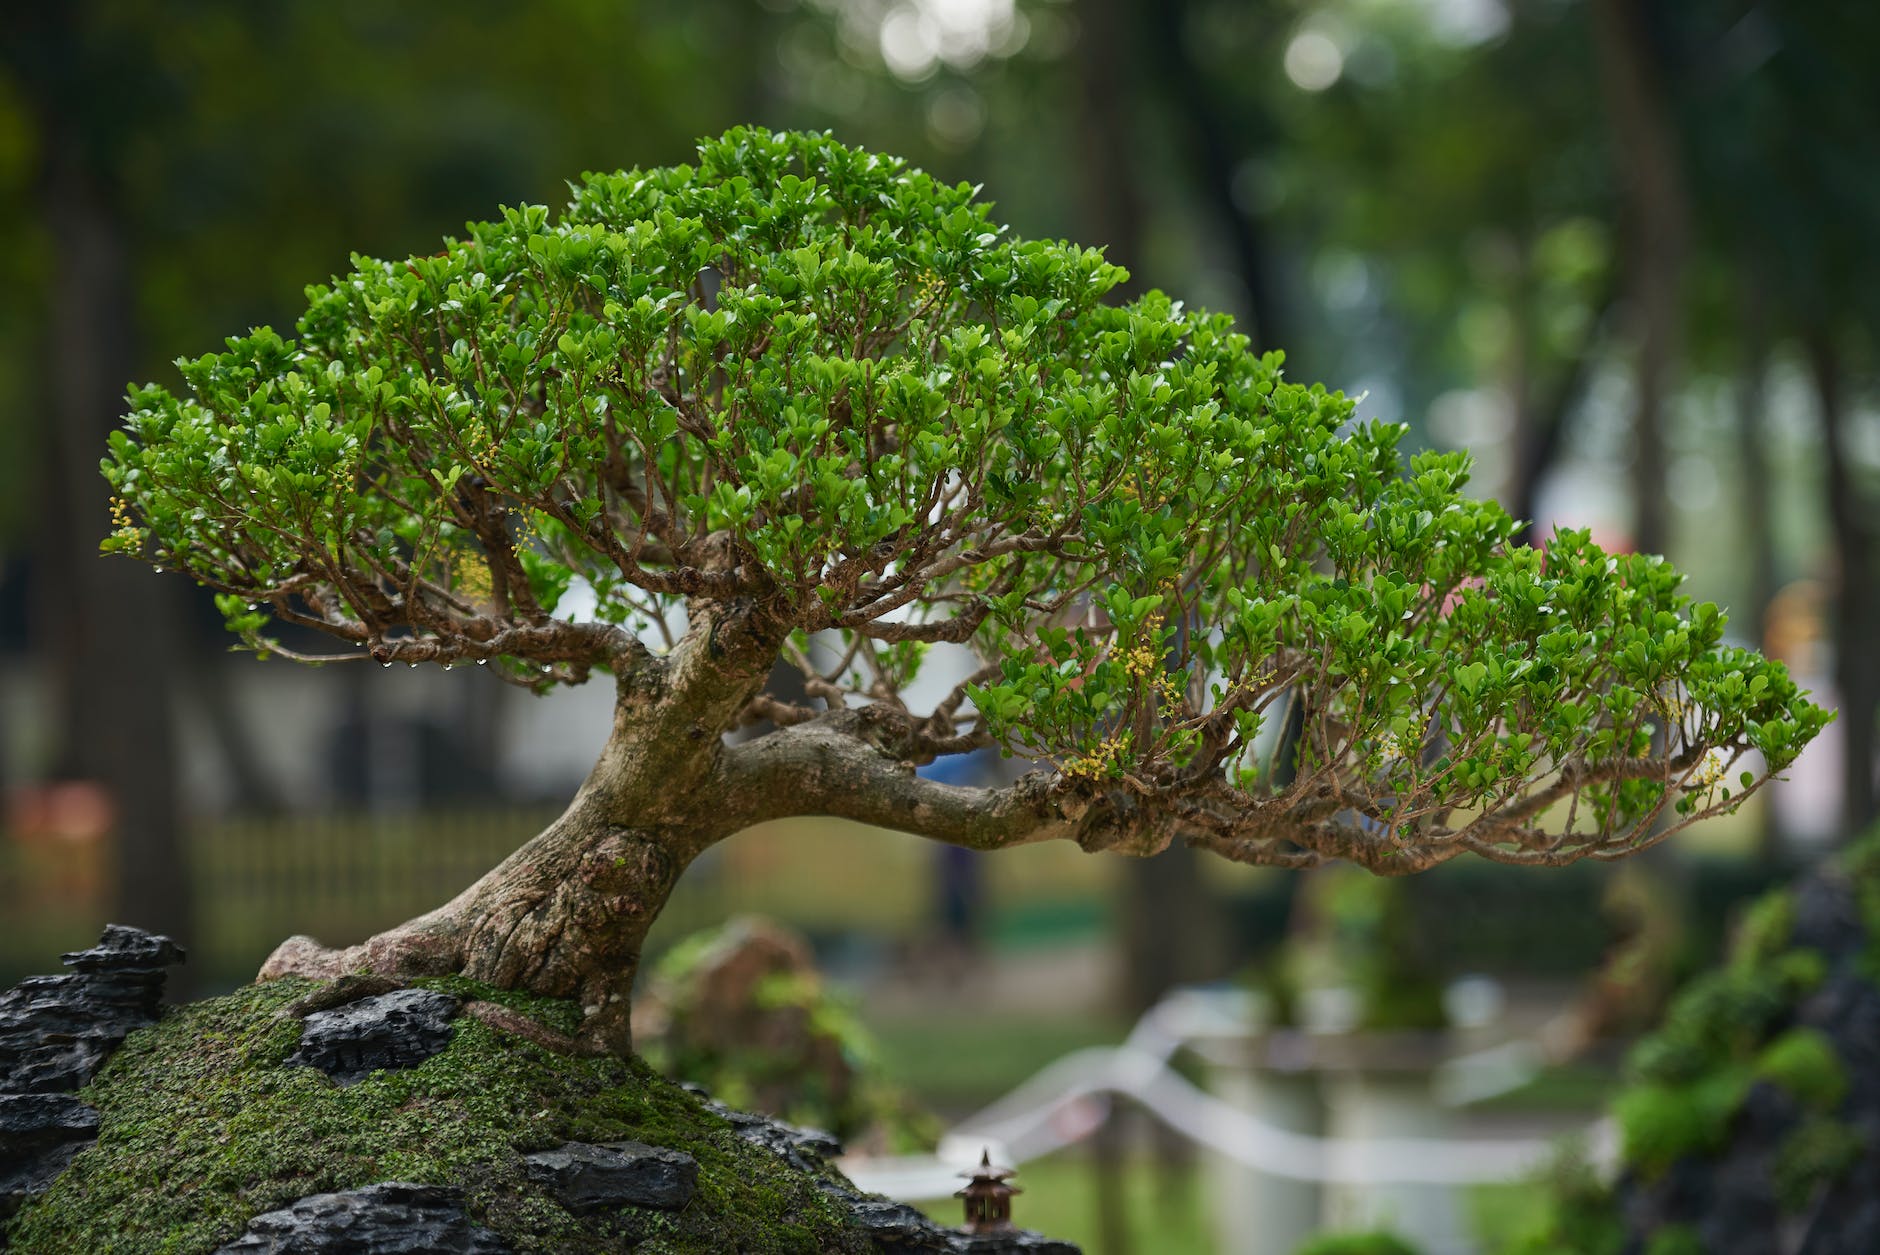 bonsai tree in close up view